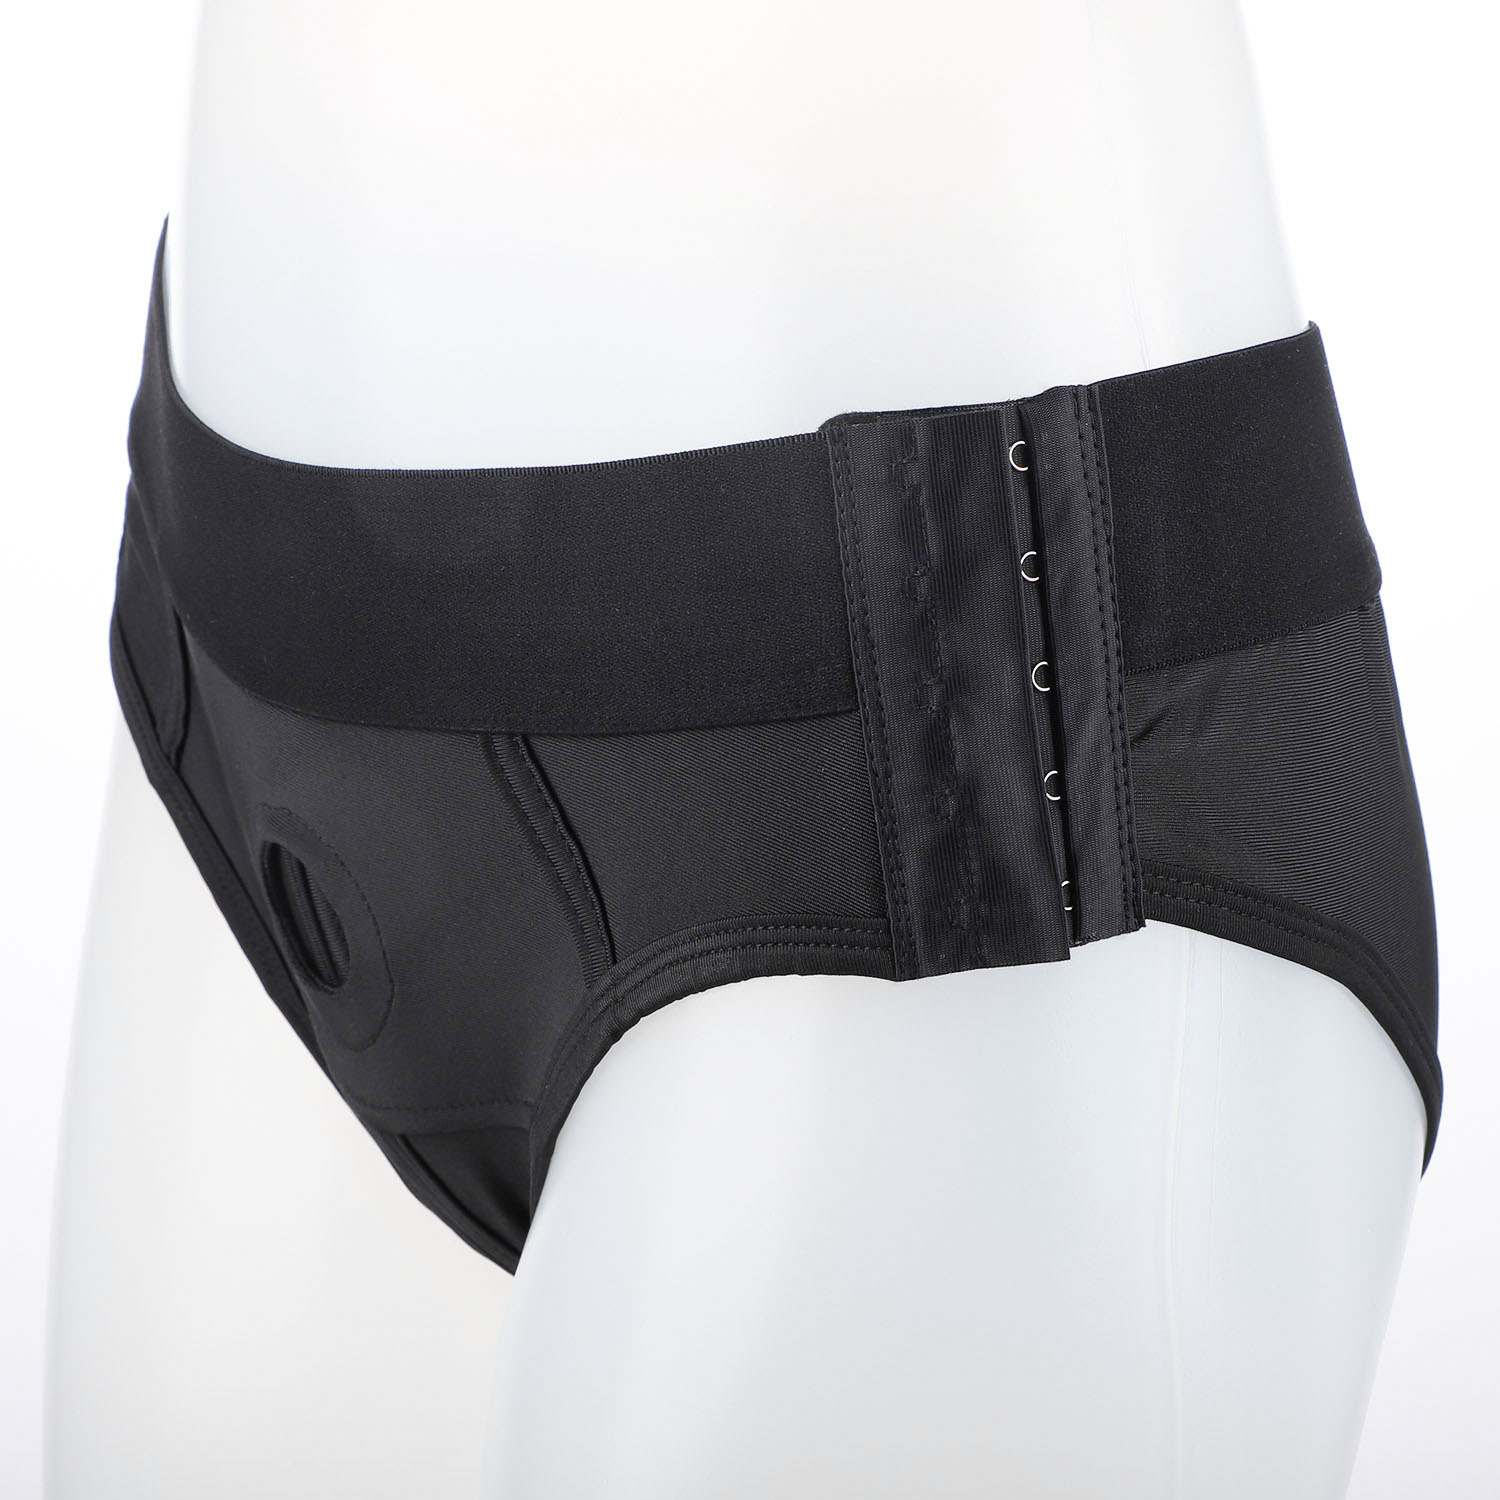  BRIEF HARNESS BLACK WITH BUCKLE